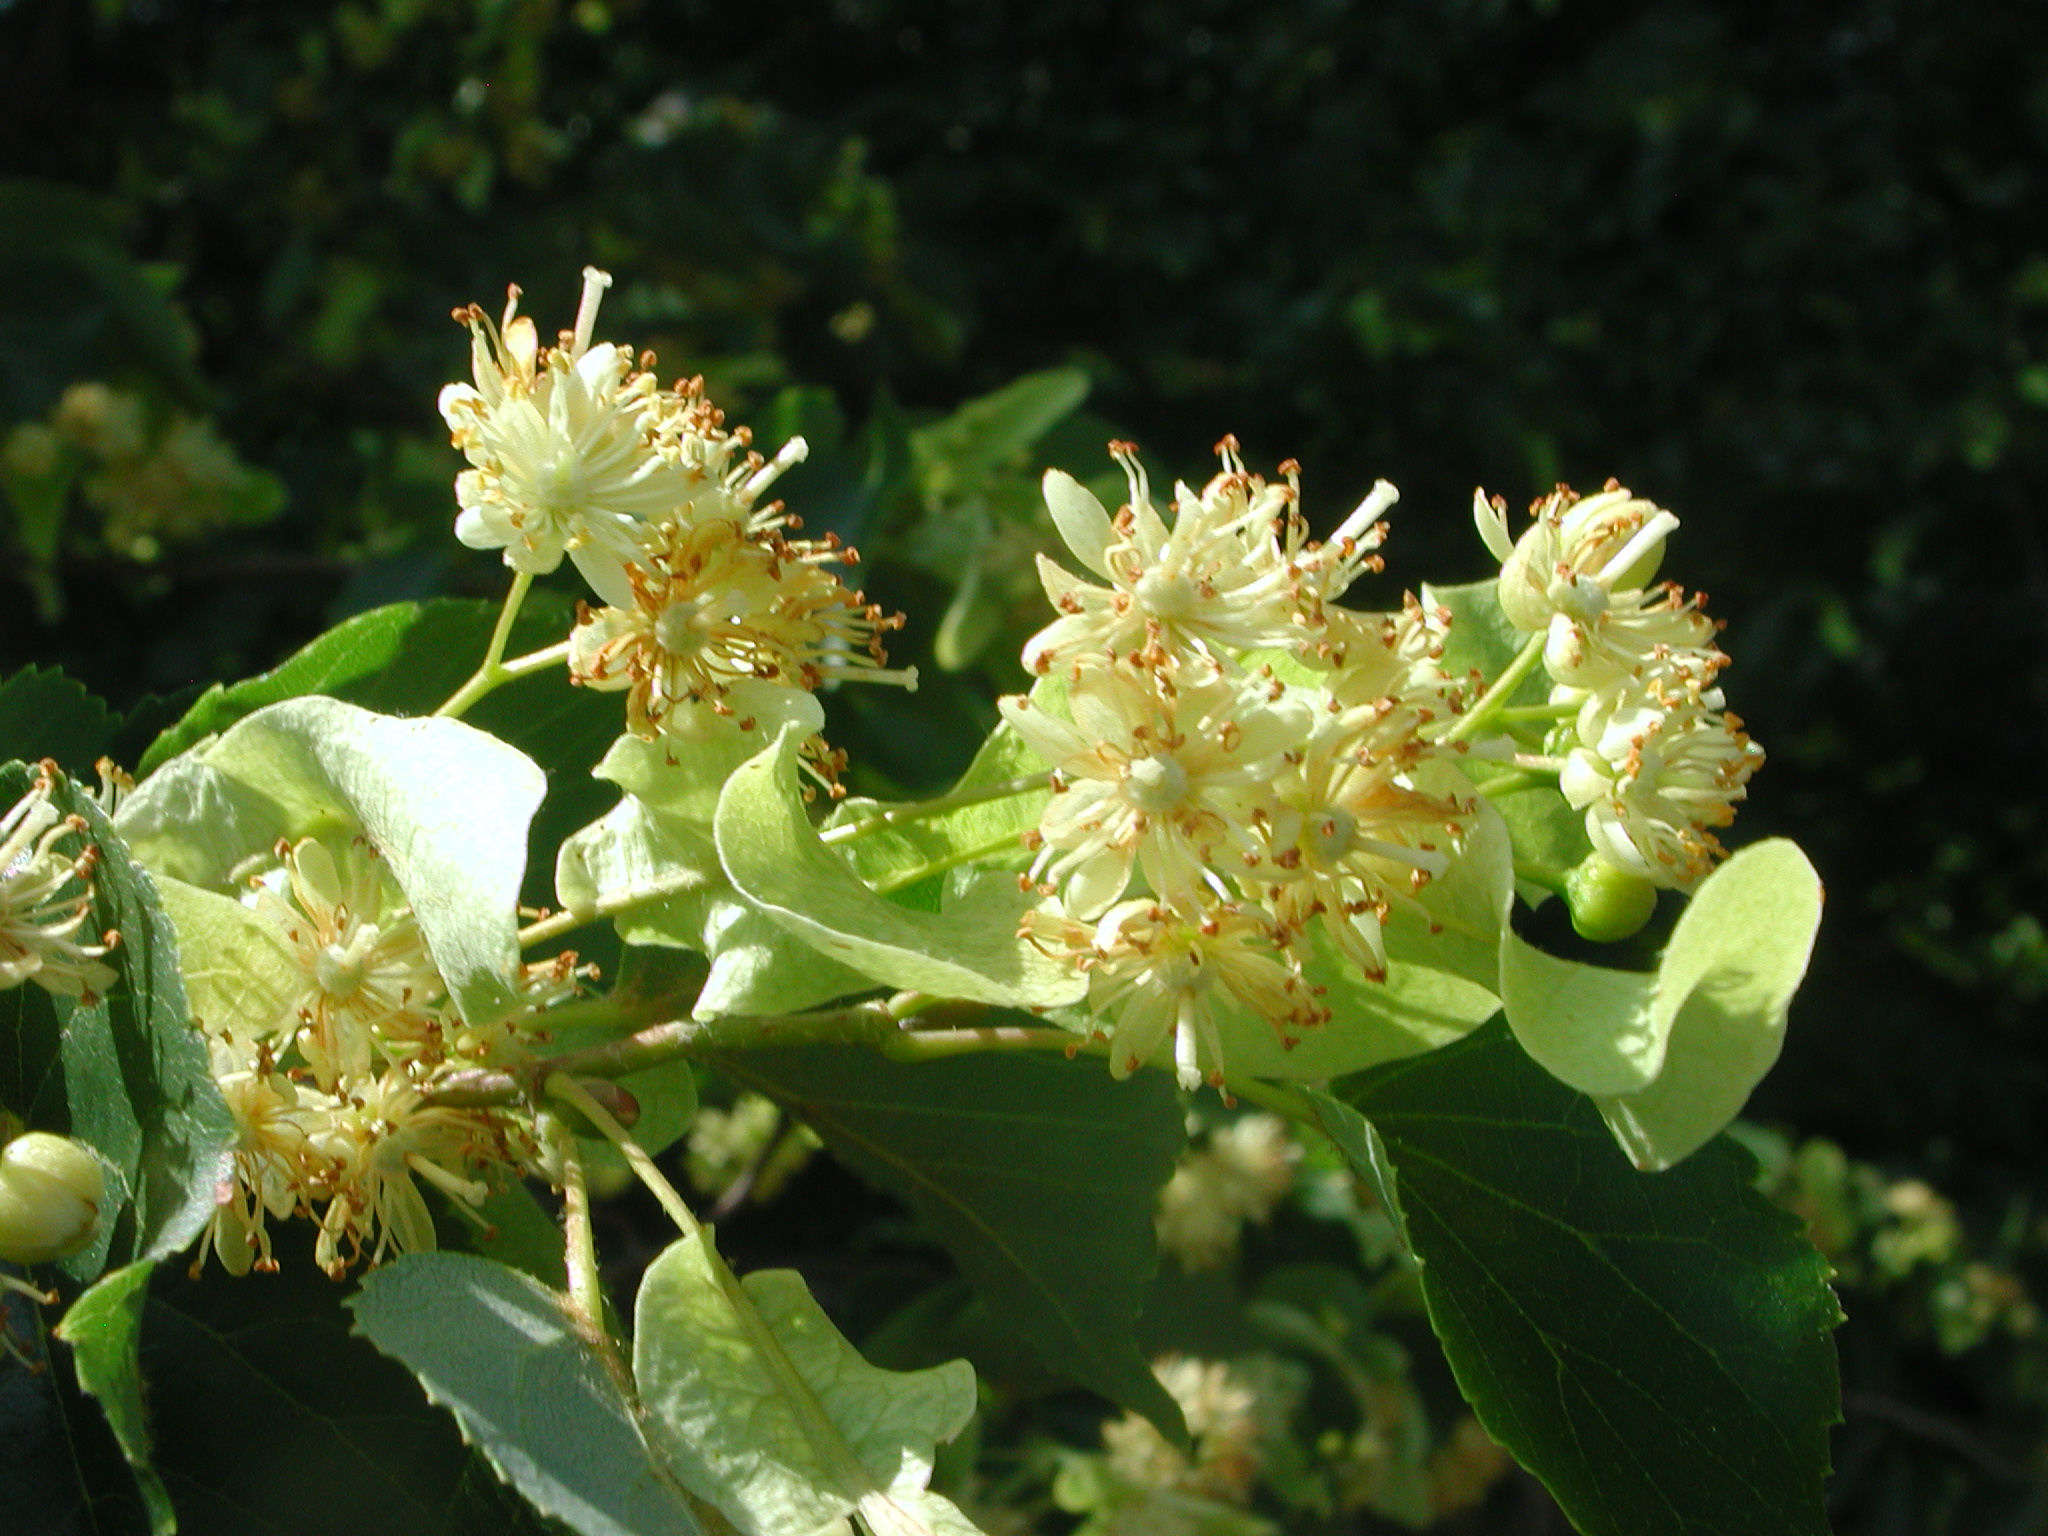 Flowers of European Linden | Nature Photo Gallery